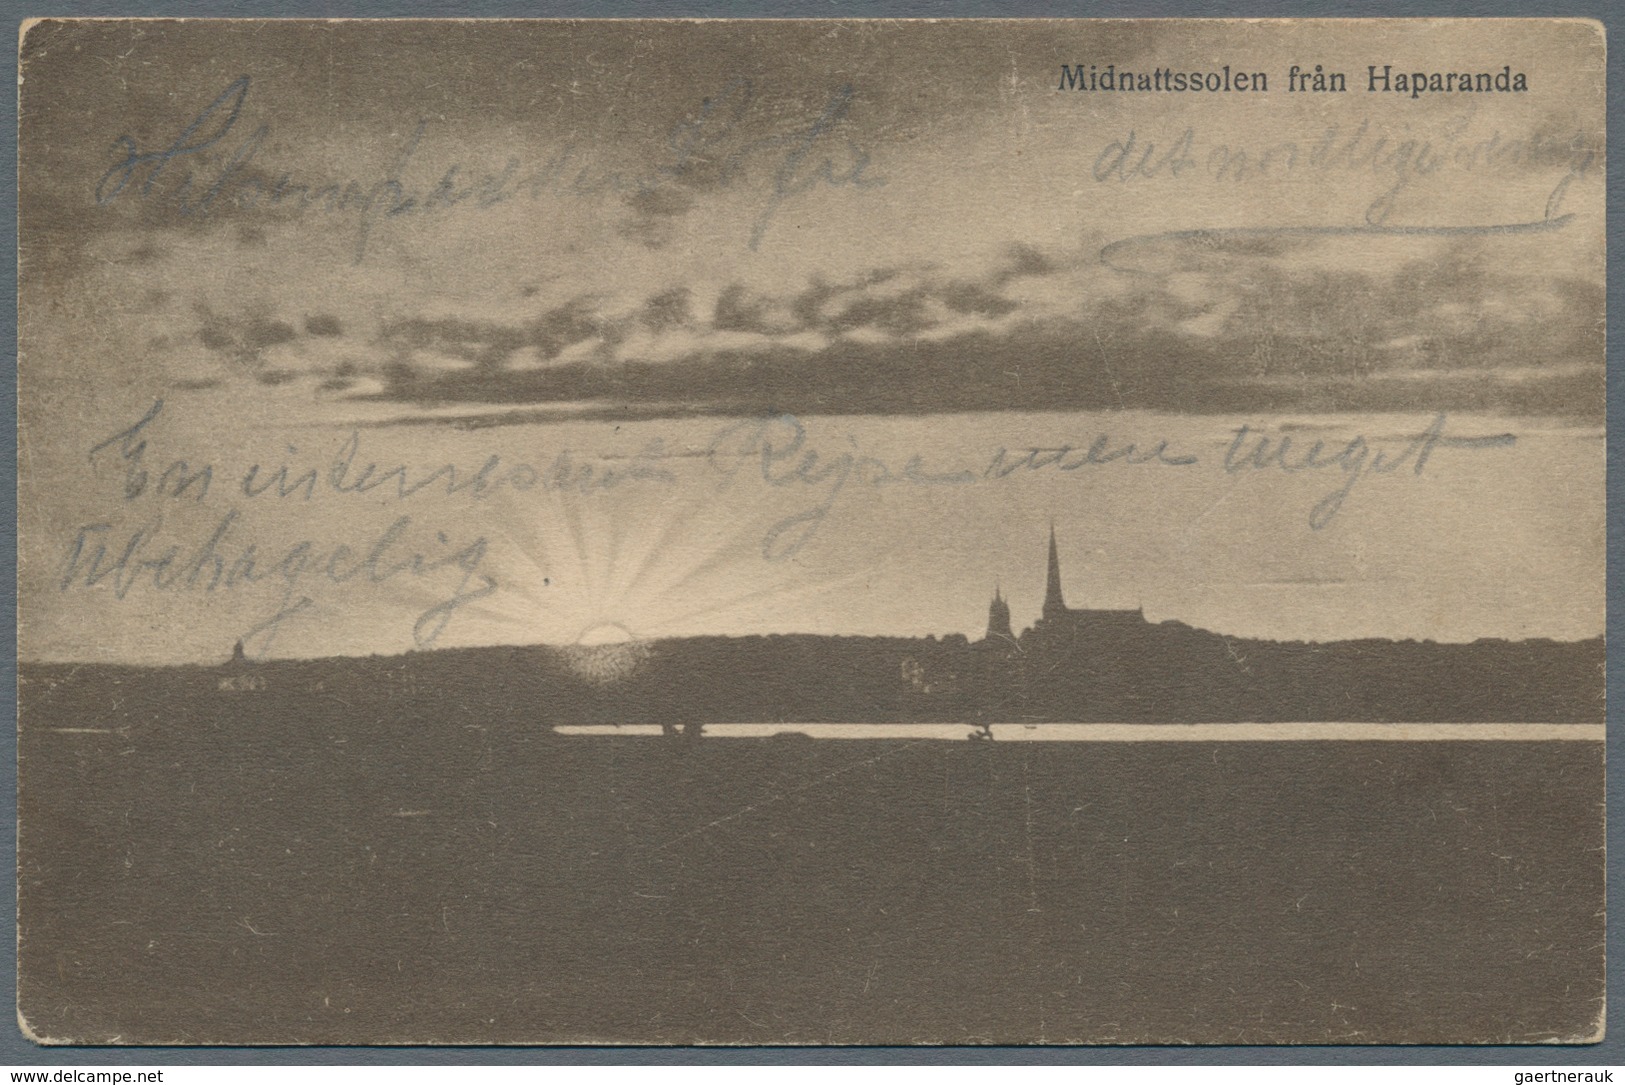 Finnland - Ganzsachen: 1886-1917 Three postal stationery cards and one picture postcard, with 1) p/s